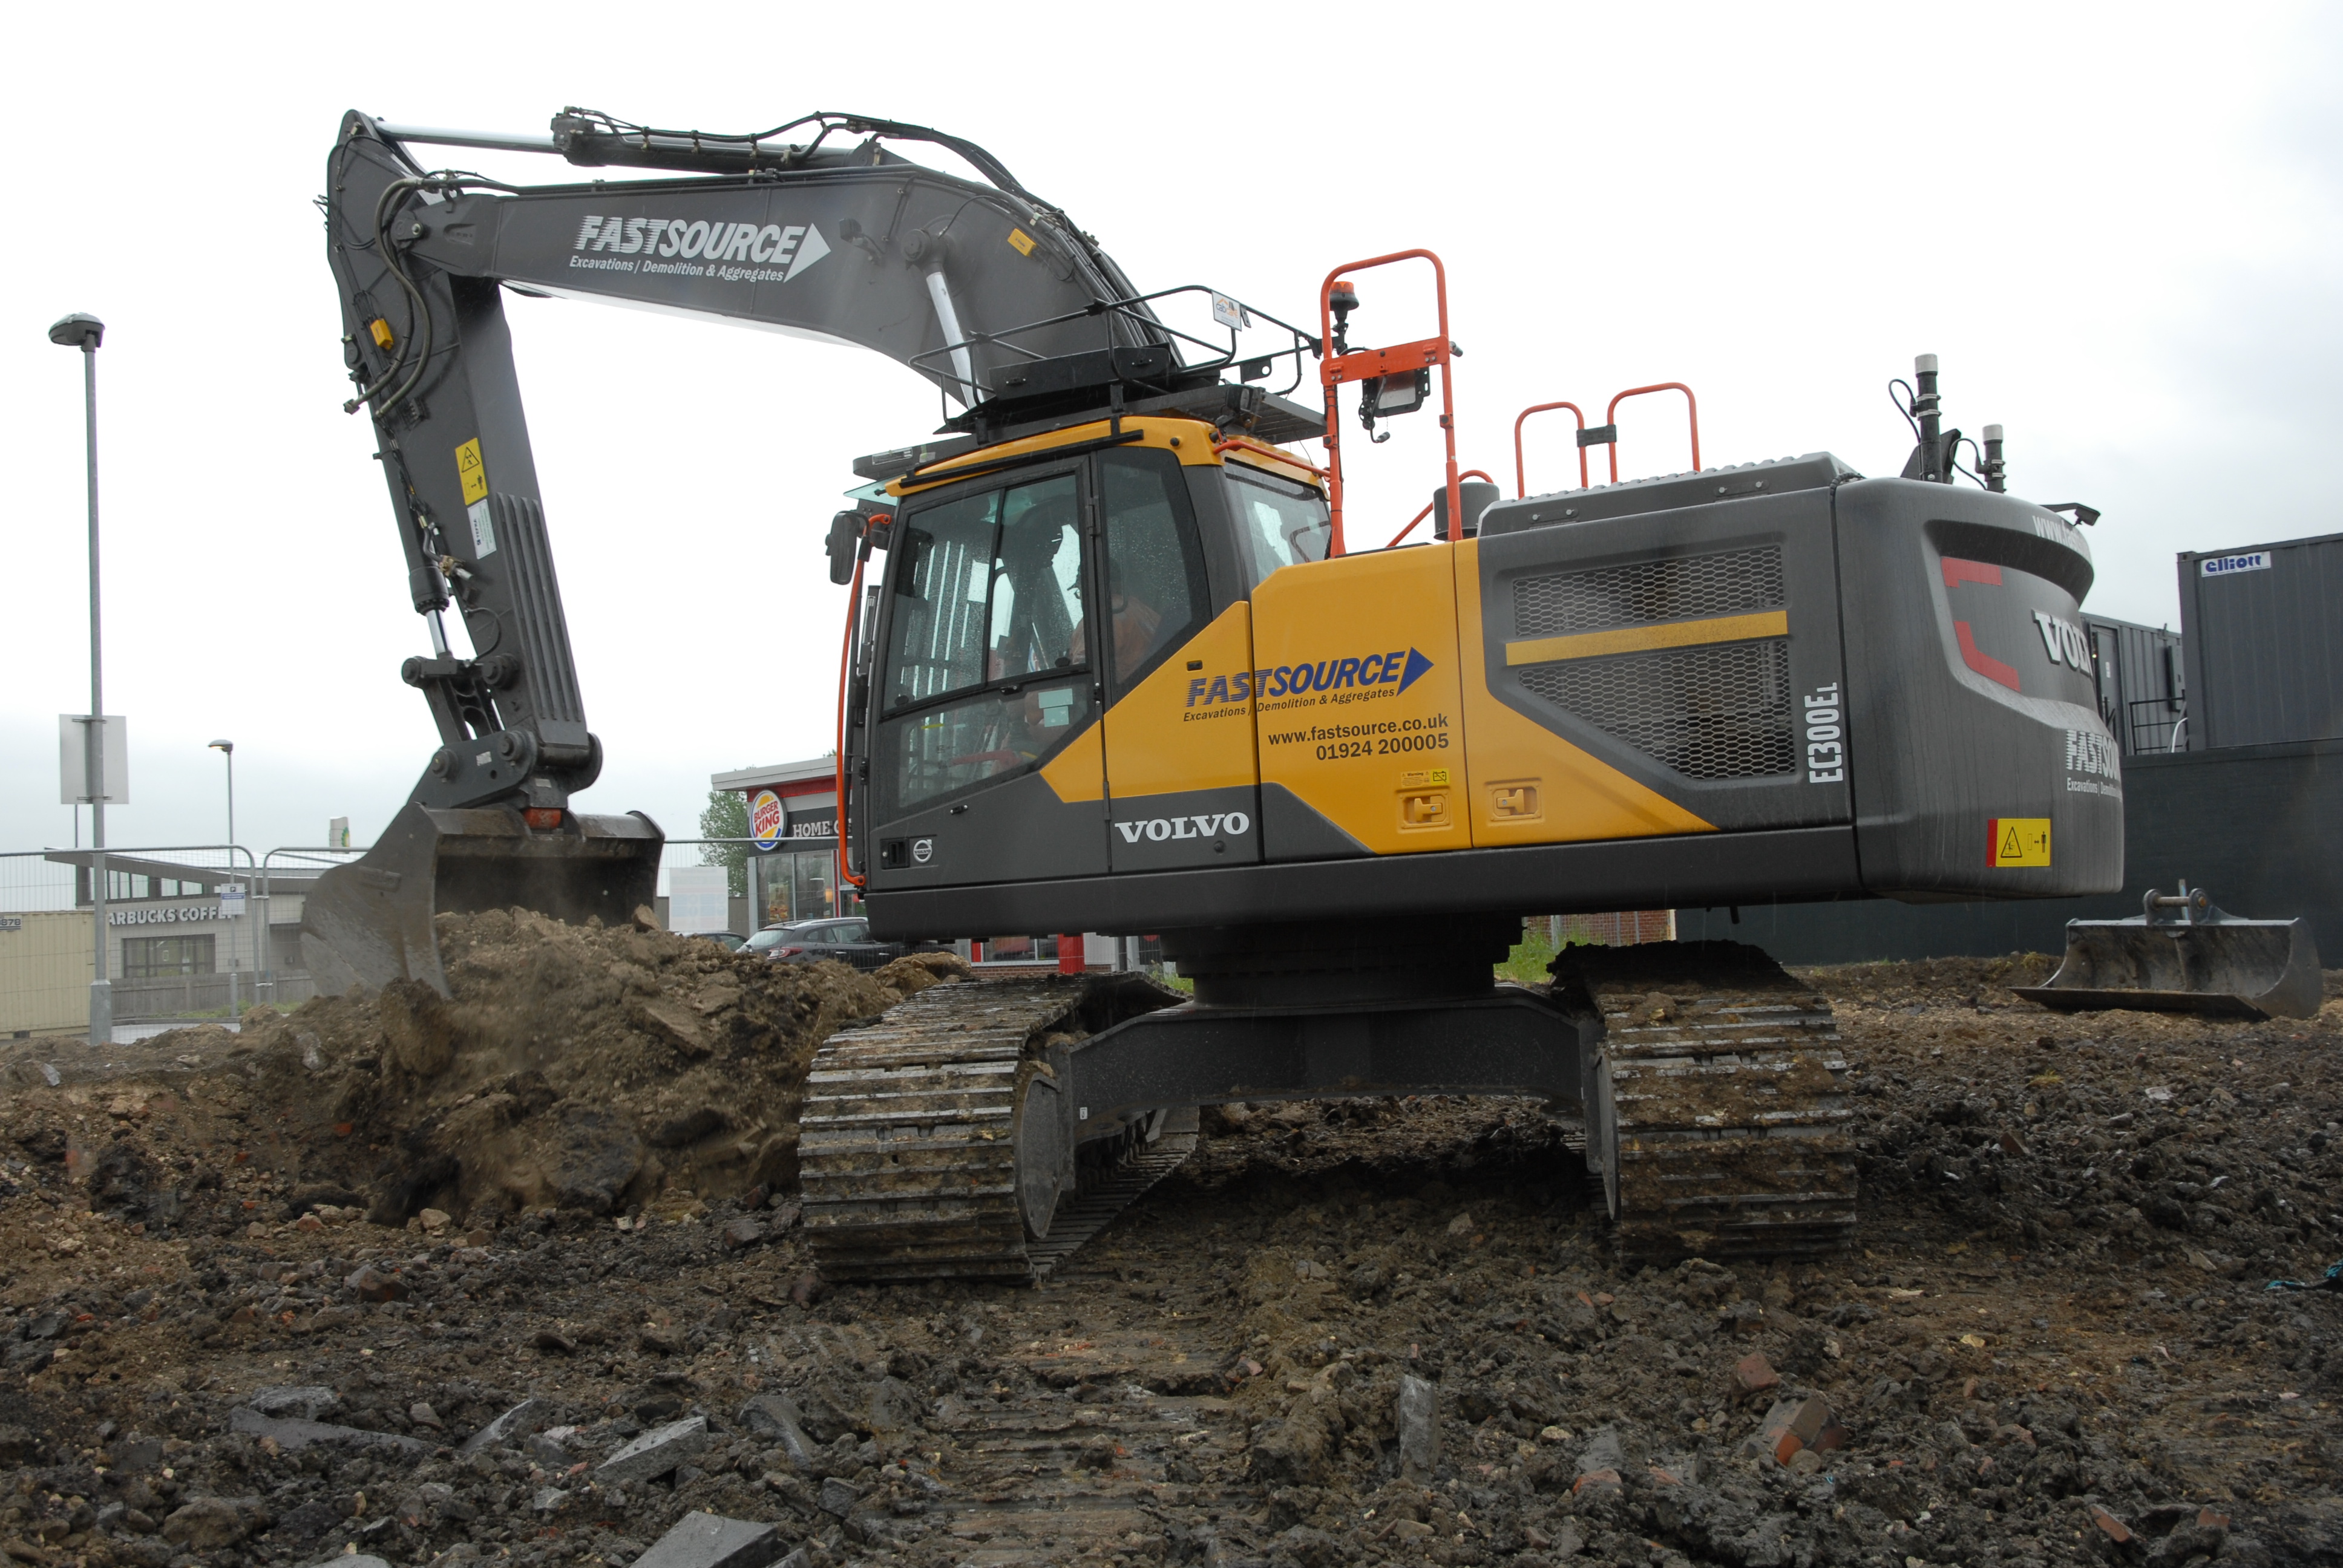 Fastsource adds another Volvo excavator to his plant fleet - CEA ...